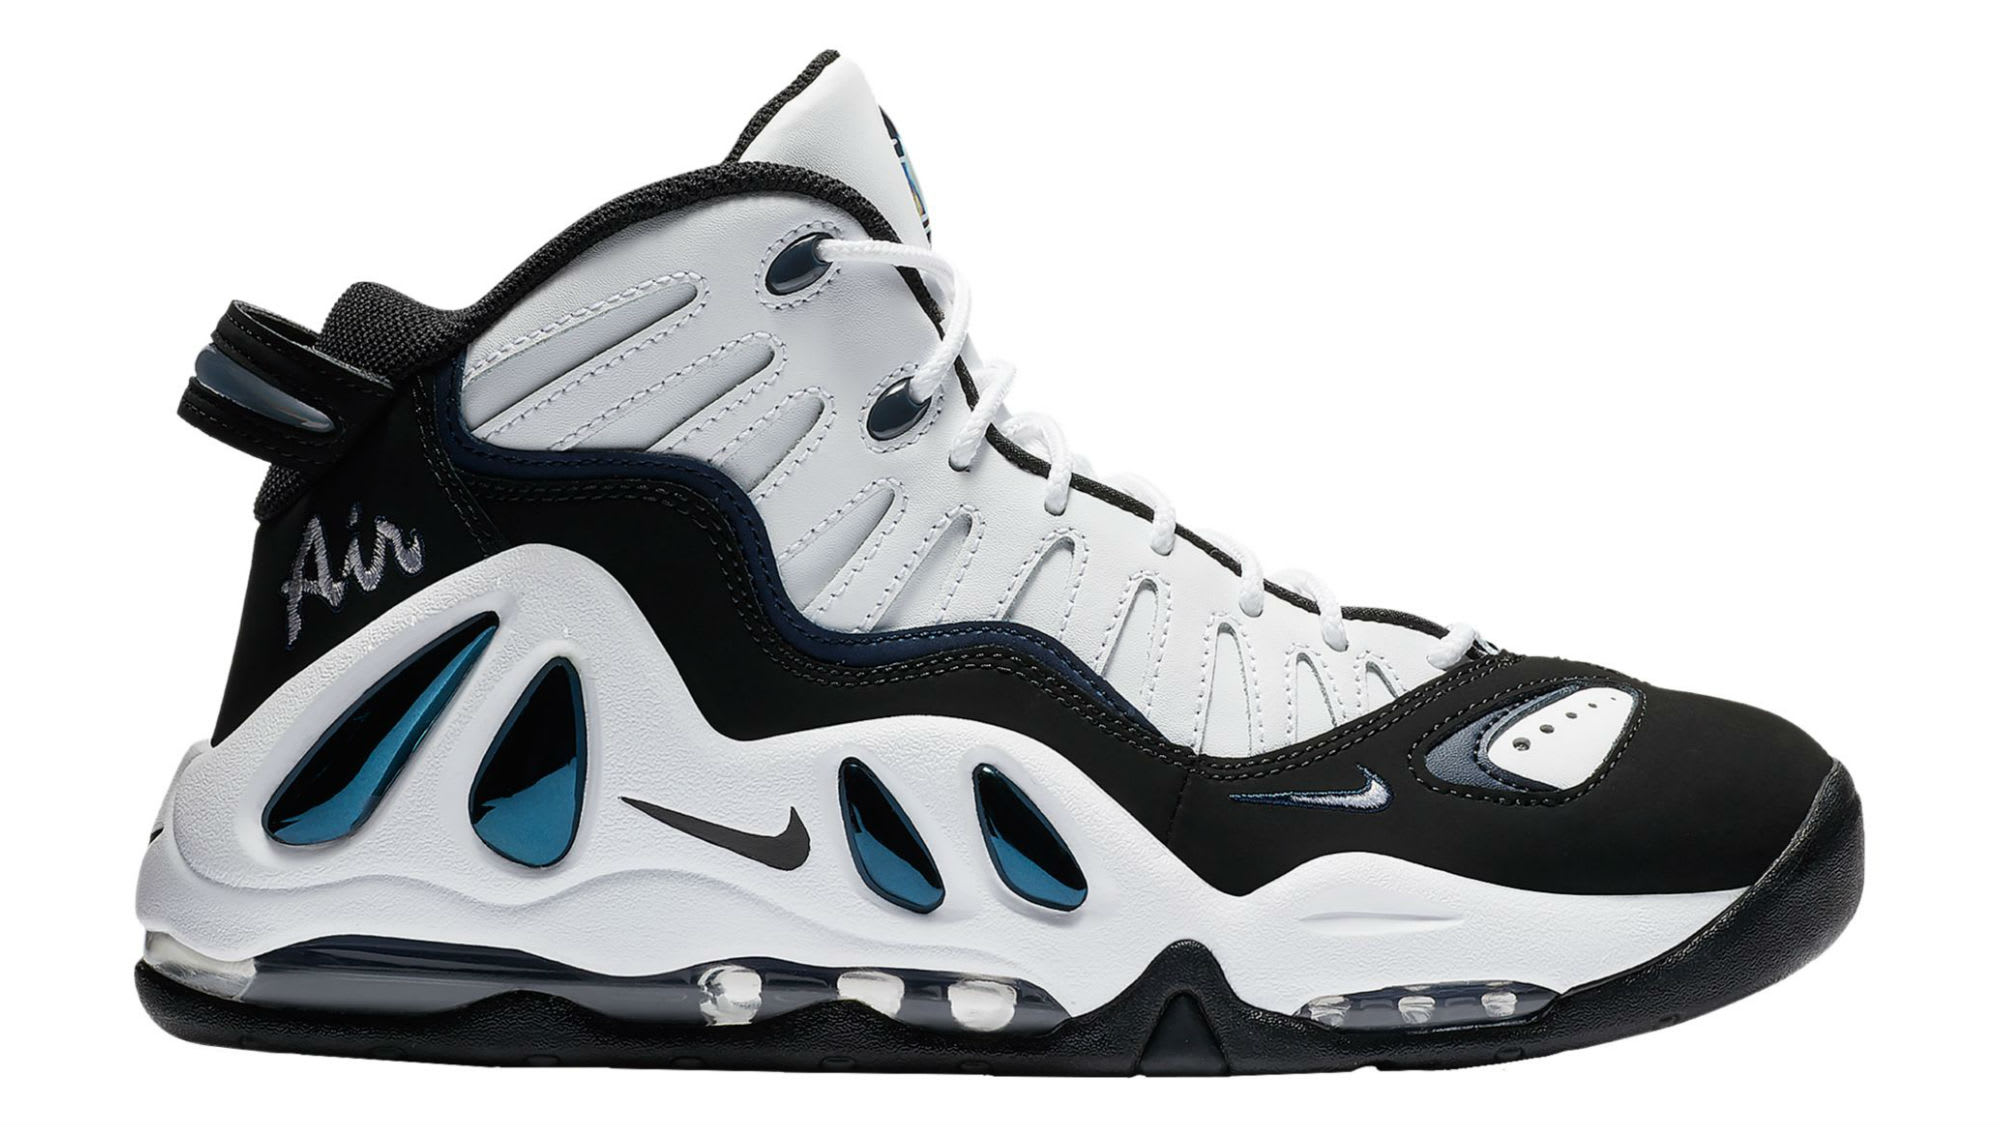 Nike Air Max Uptempo 97 White Black College Navy Release Date 399207-101